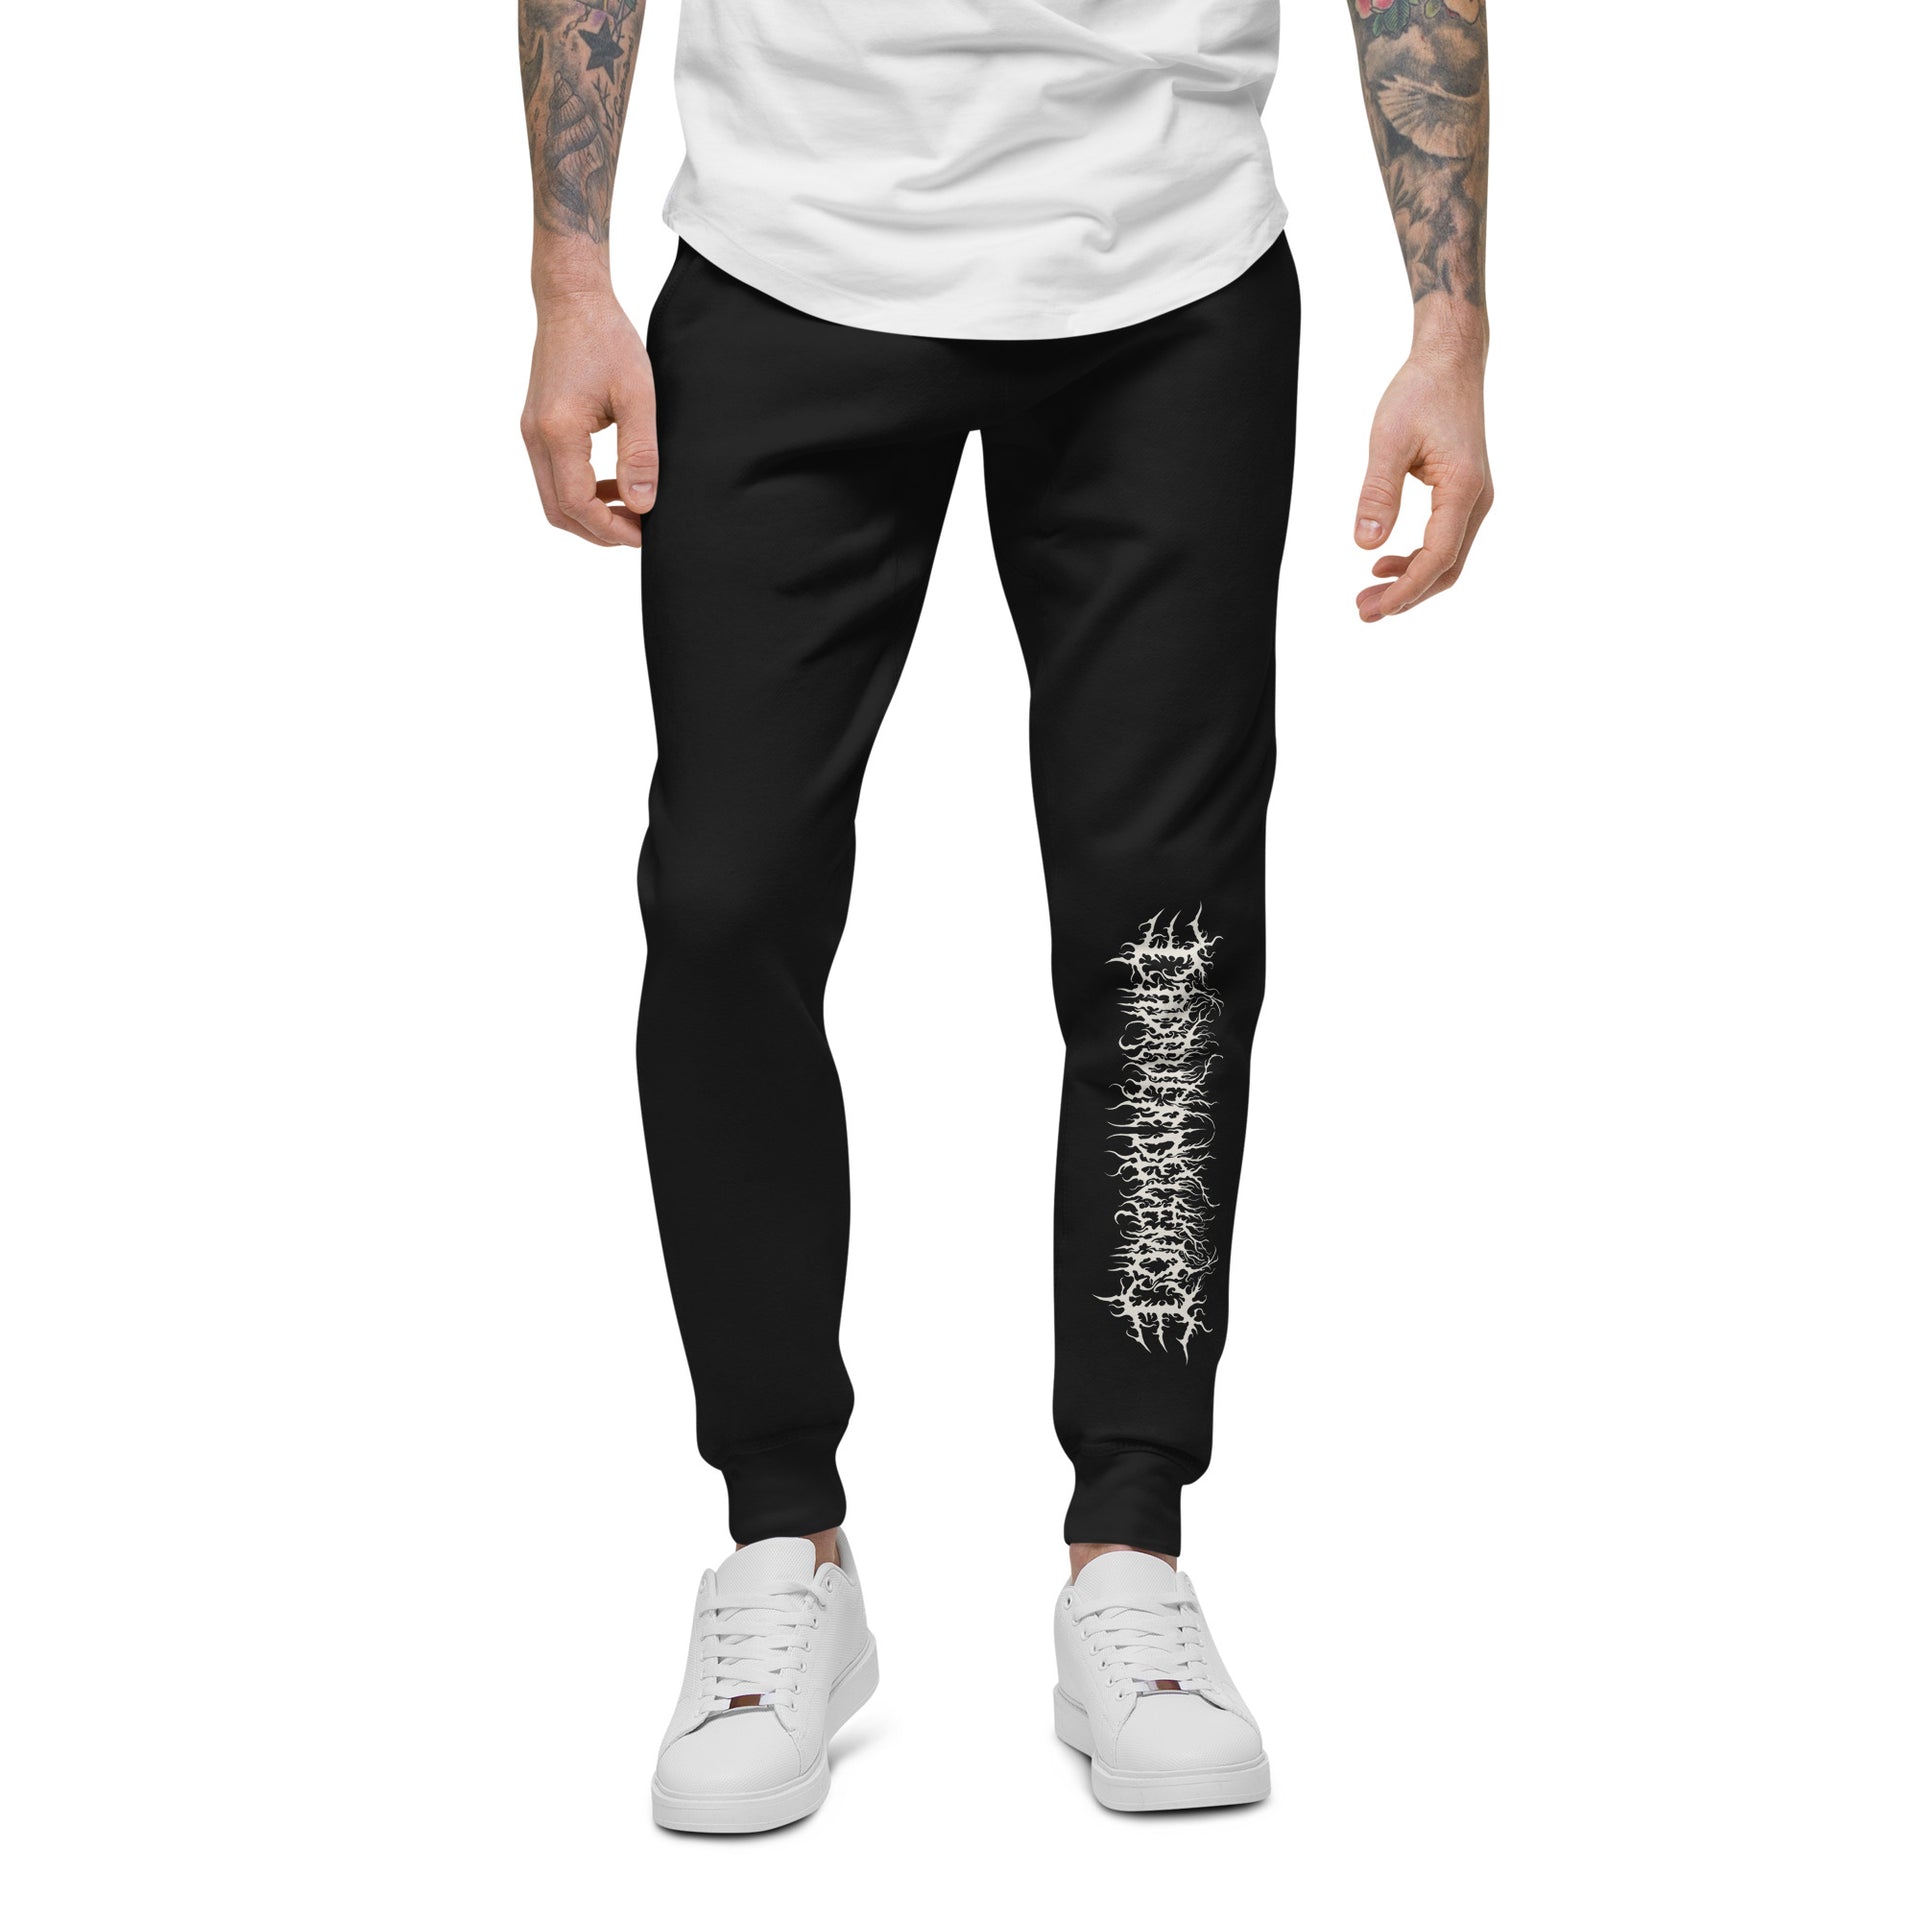 Cuff The Duke (Stacked Logo) - Unisex fleece sweatpants in Black, Grey and  Charcoal